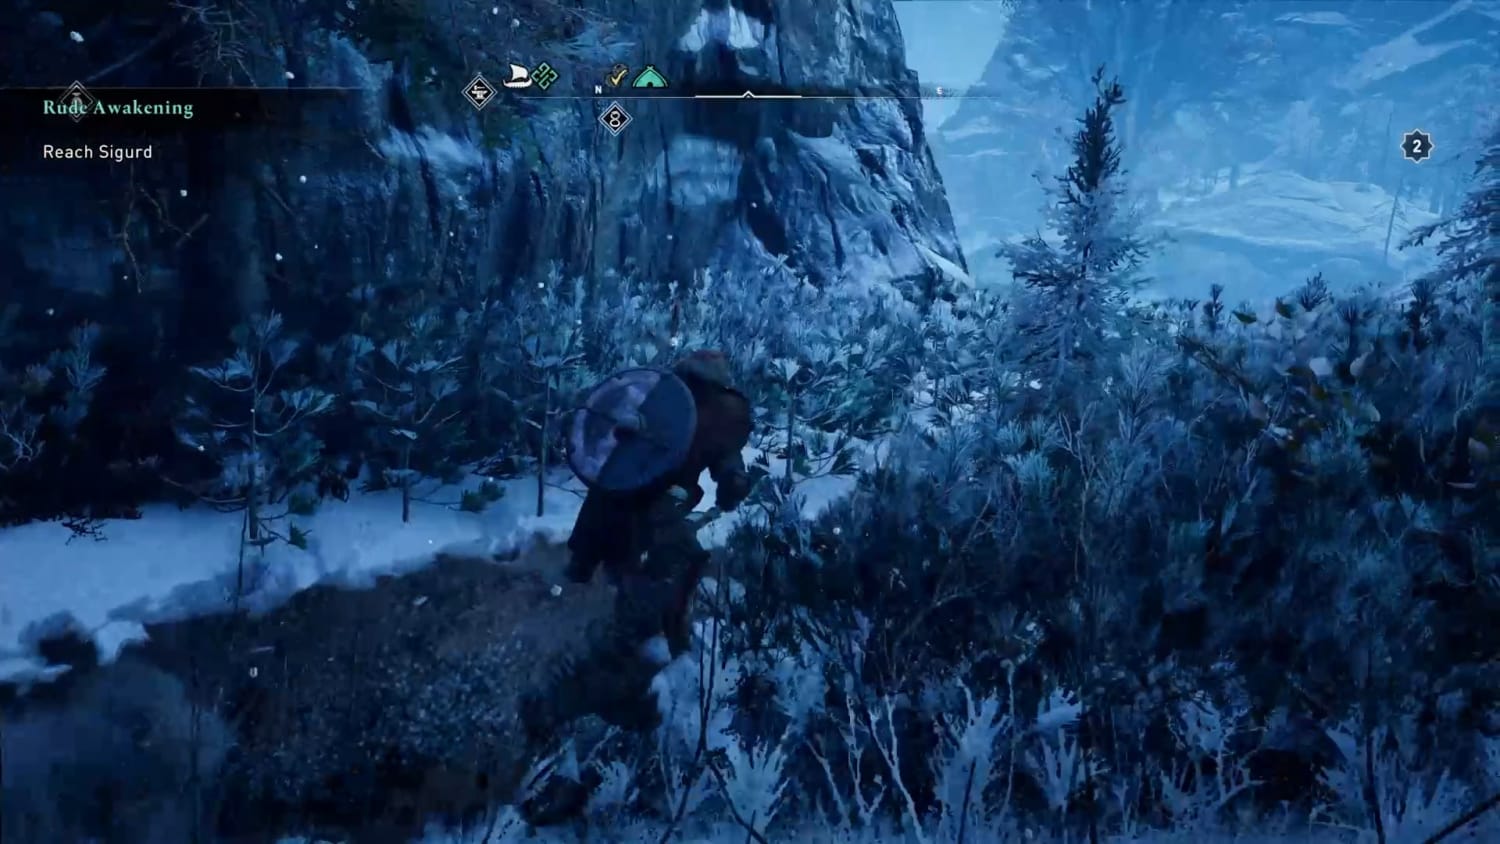 [Assassin's Creed Valhalla] What sorcery is this